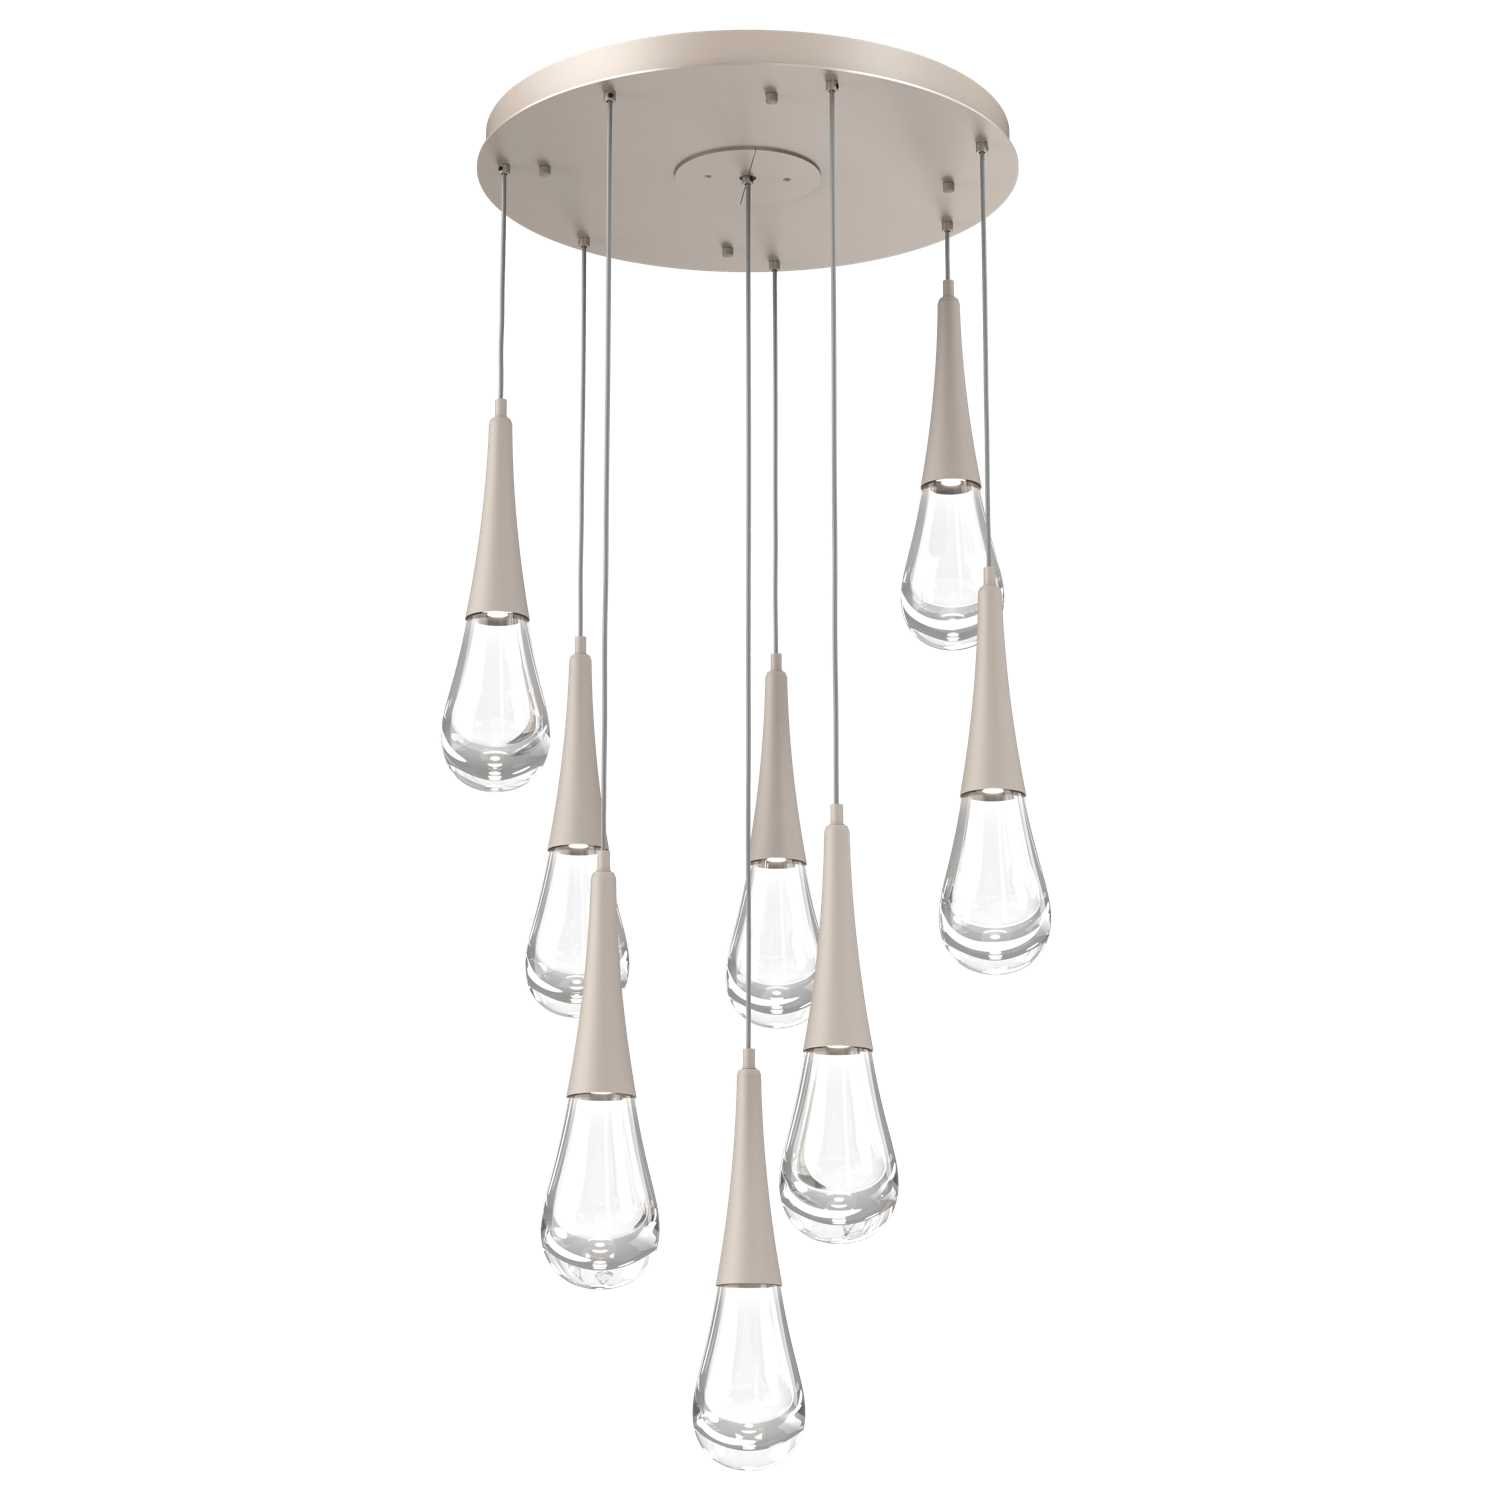 CHB0078-08-BS-Hammerton-Studio-Raindrop-8-light-round-pendant-chandelier-with-metallic-beige-silver-finish-and-clear-blown-glass-shades-and-LED-lamping